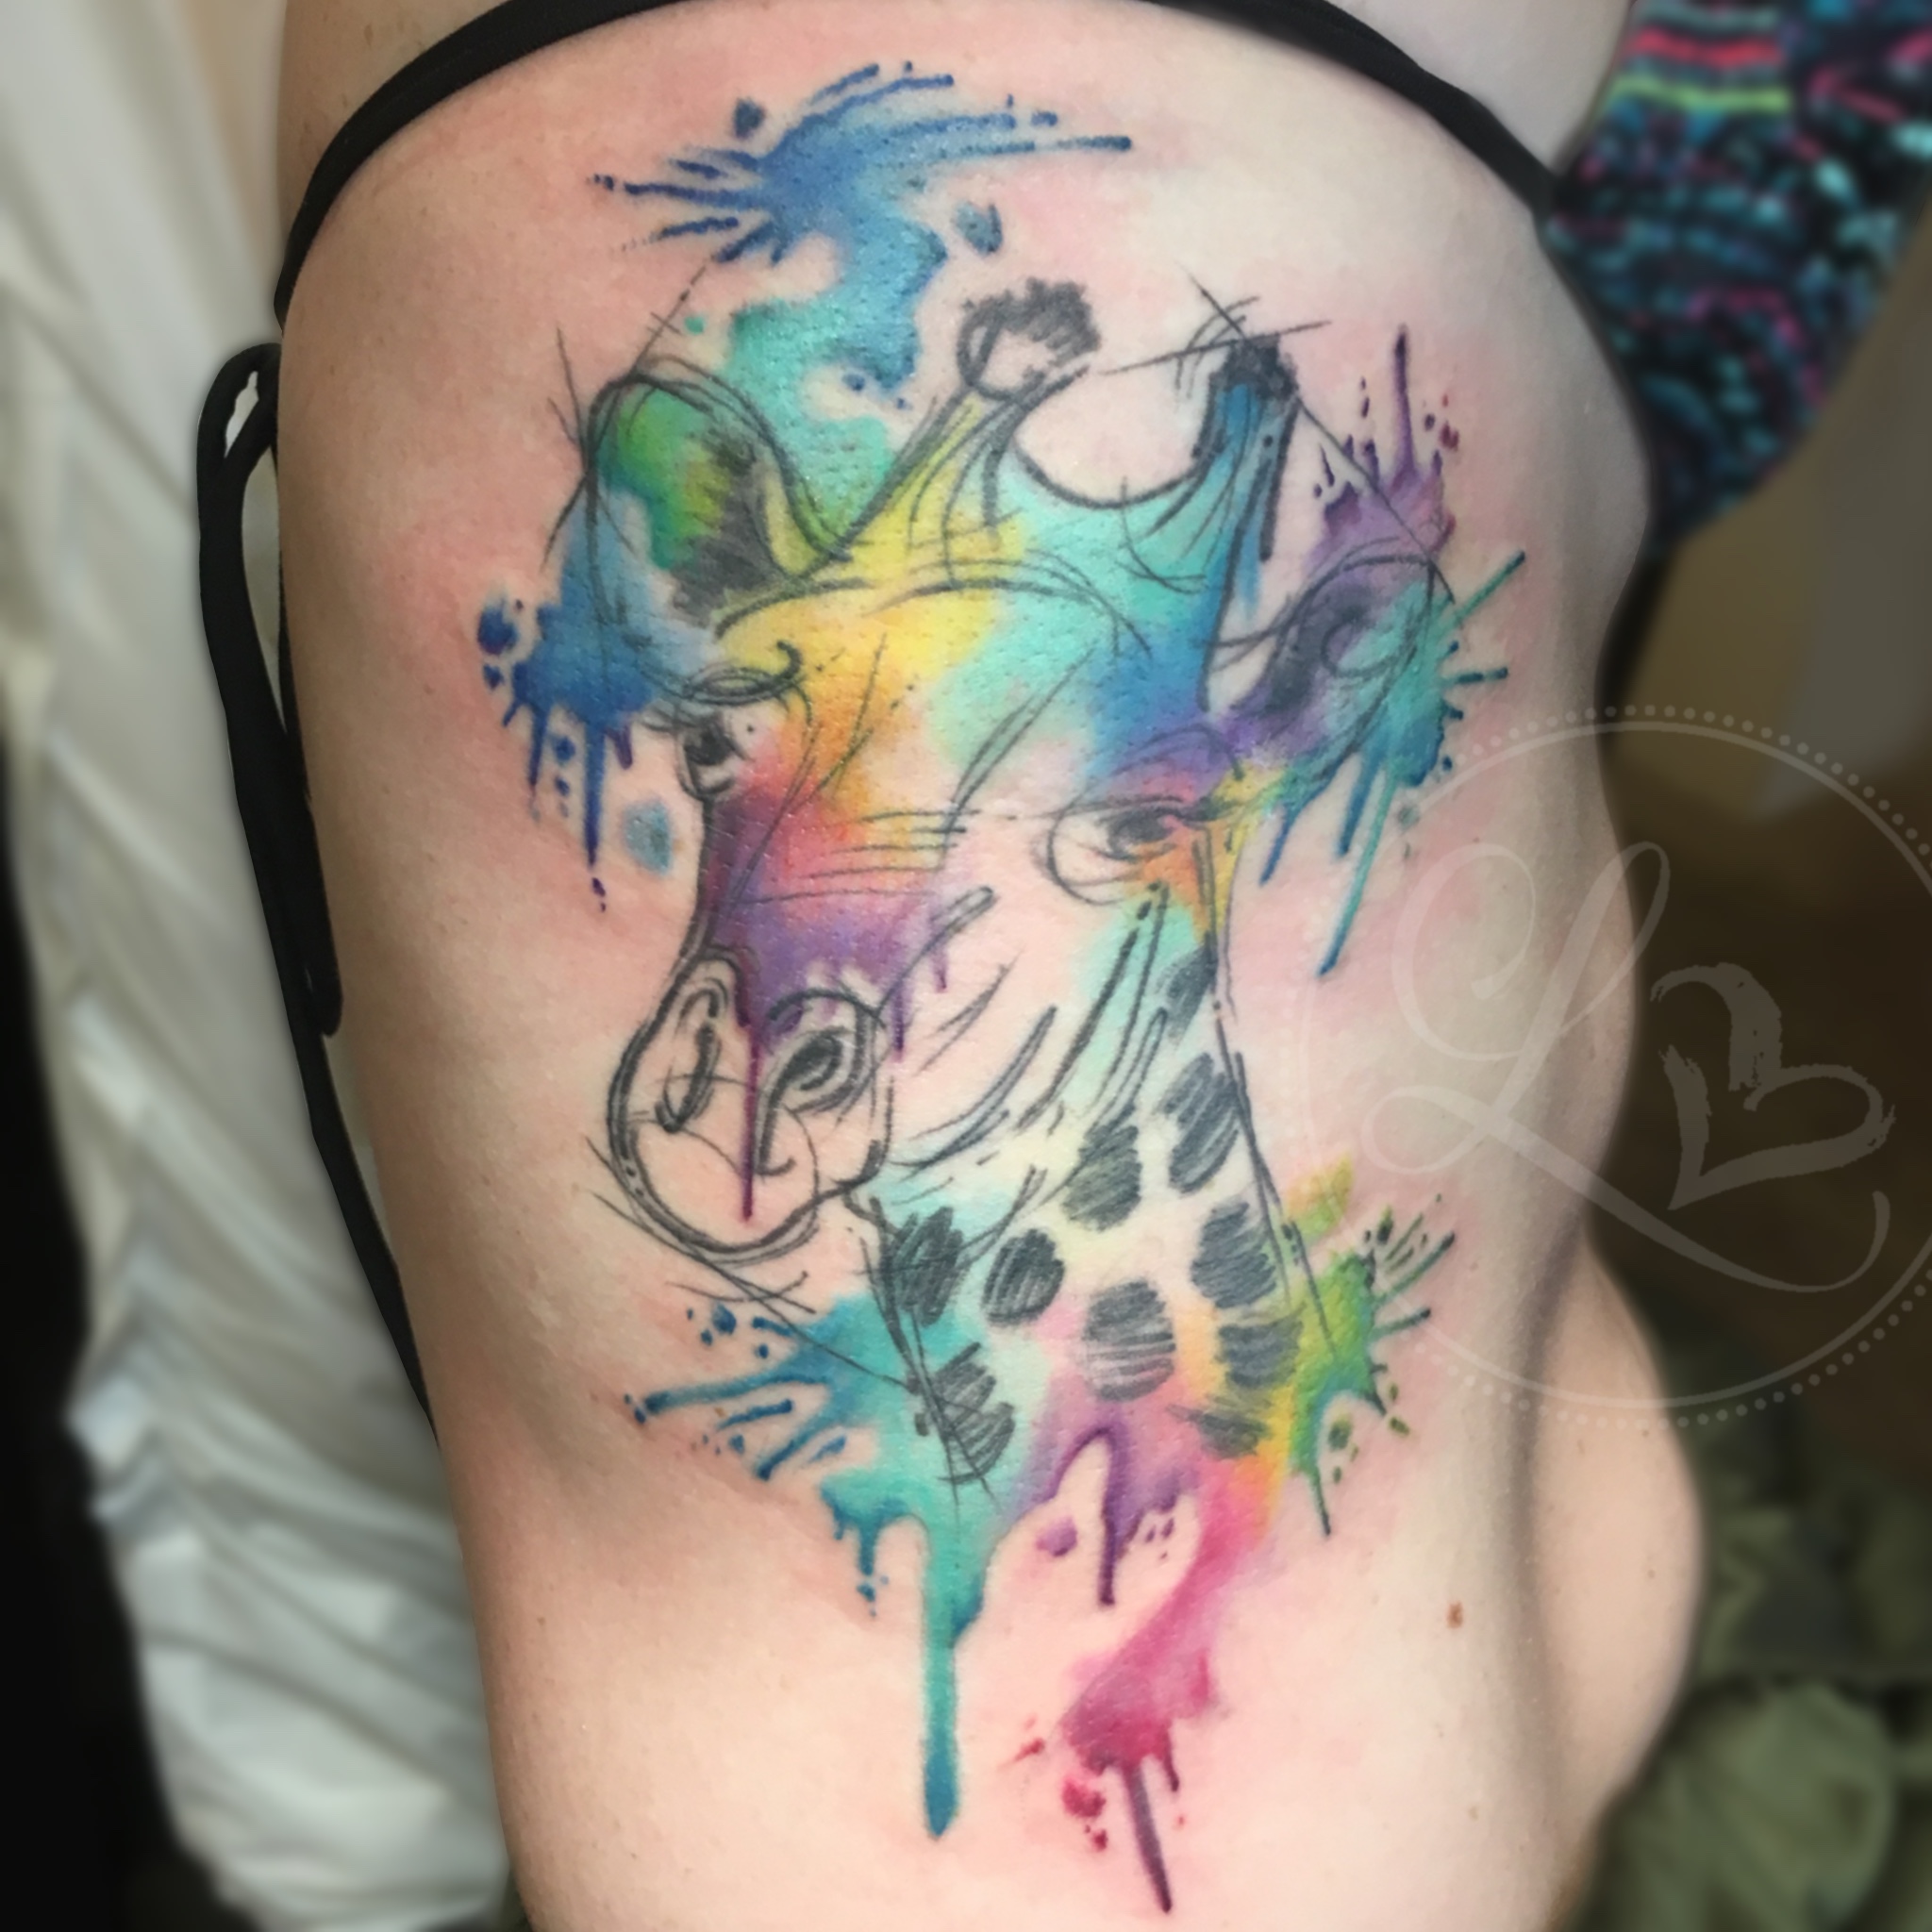 Colorful watercolor style giraffe tattoo on the ibs